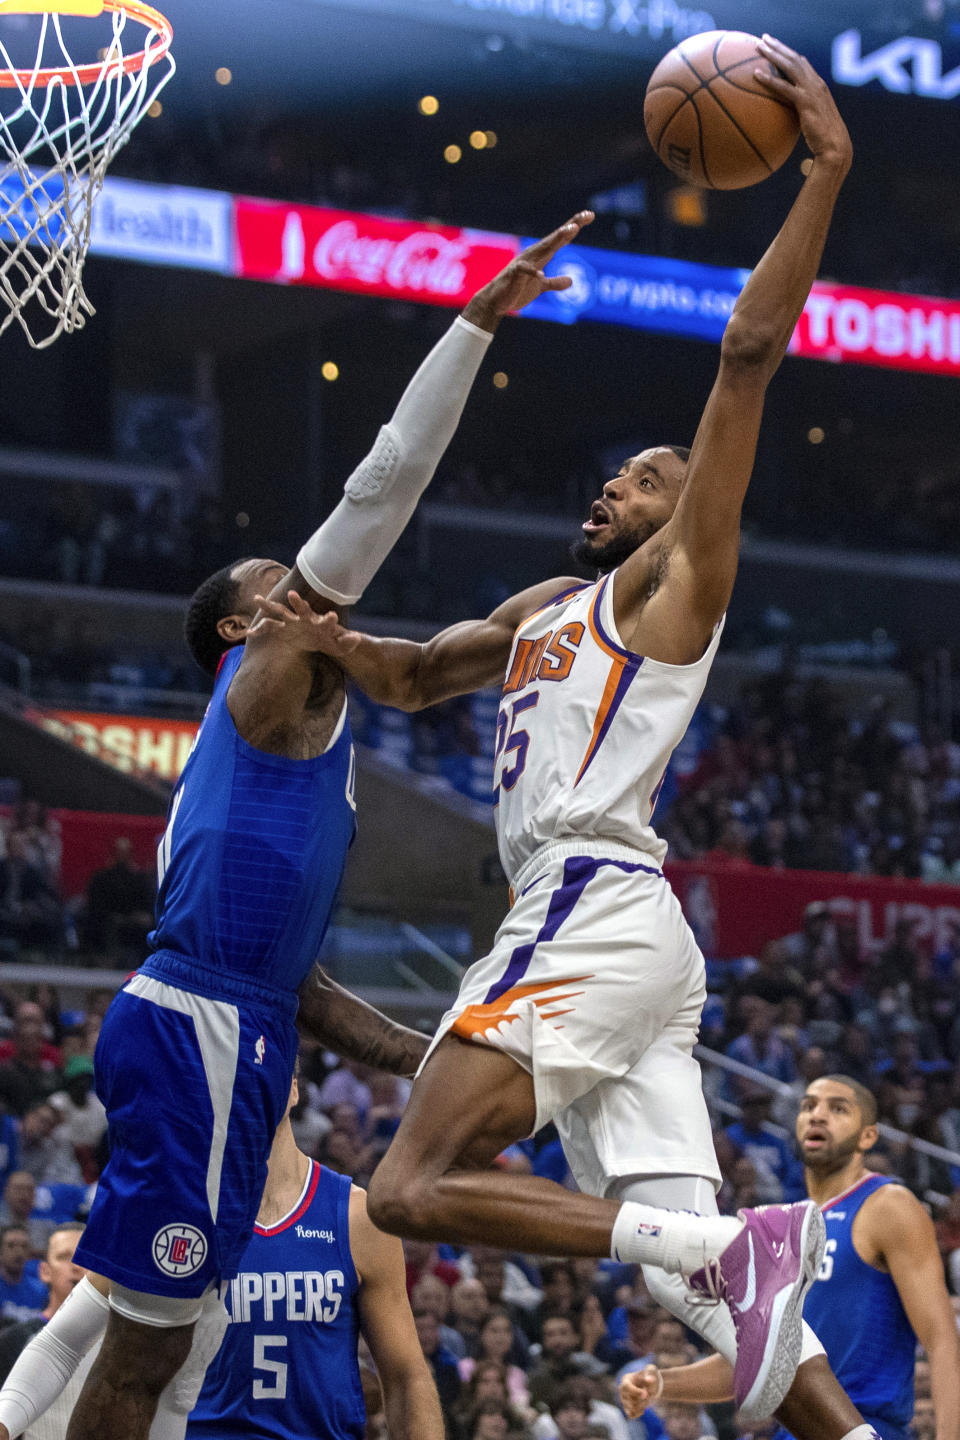 Phoenix Suns forward Mikal Bridges, right, goes for a dunk against Los Angeles Clippers guard John Wall during the first half of an NBA basketball game, Sunday, Oct. 23, 2022, in Los Angeles. (AP Photo/Alex Gallardo)